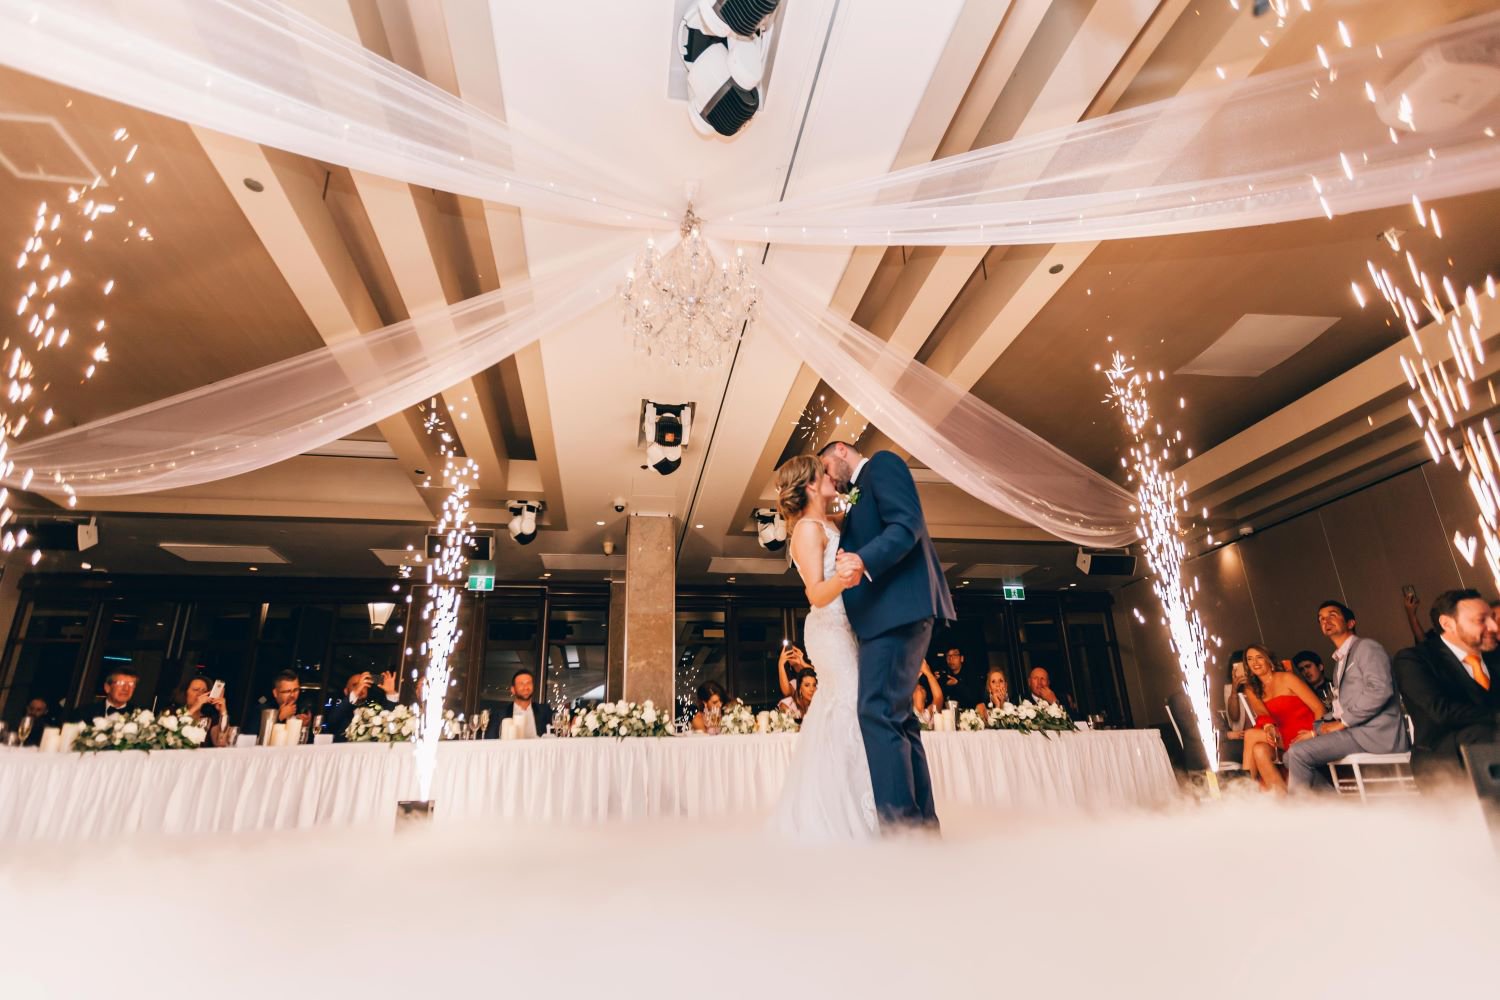 How Long Should A Wedding Reception Be?